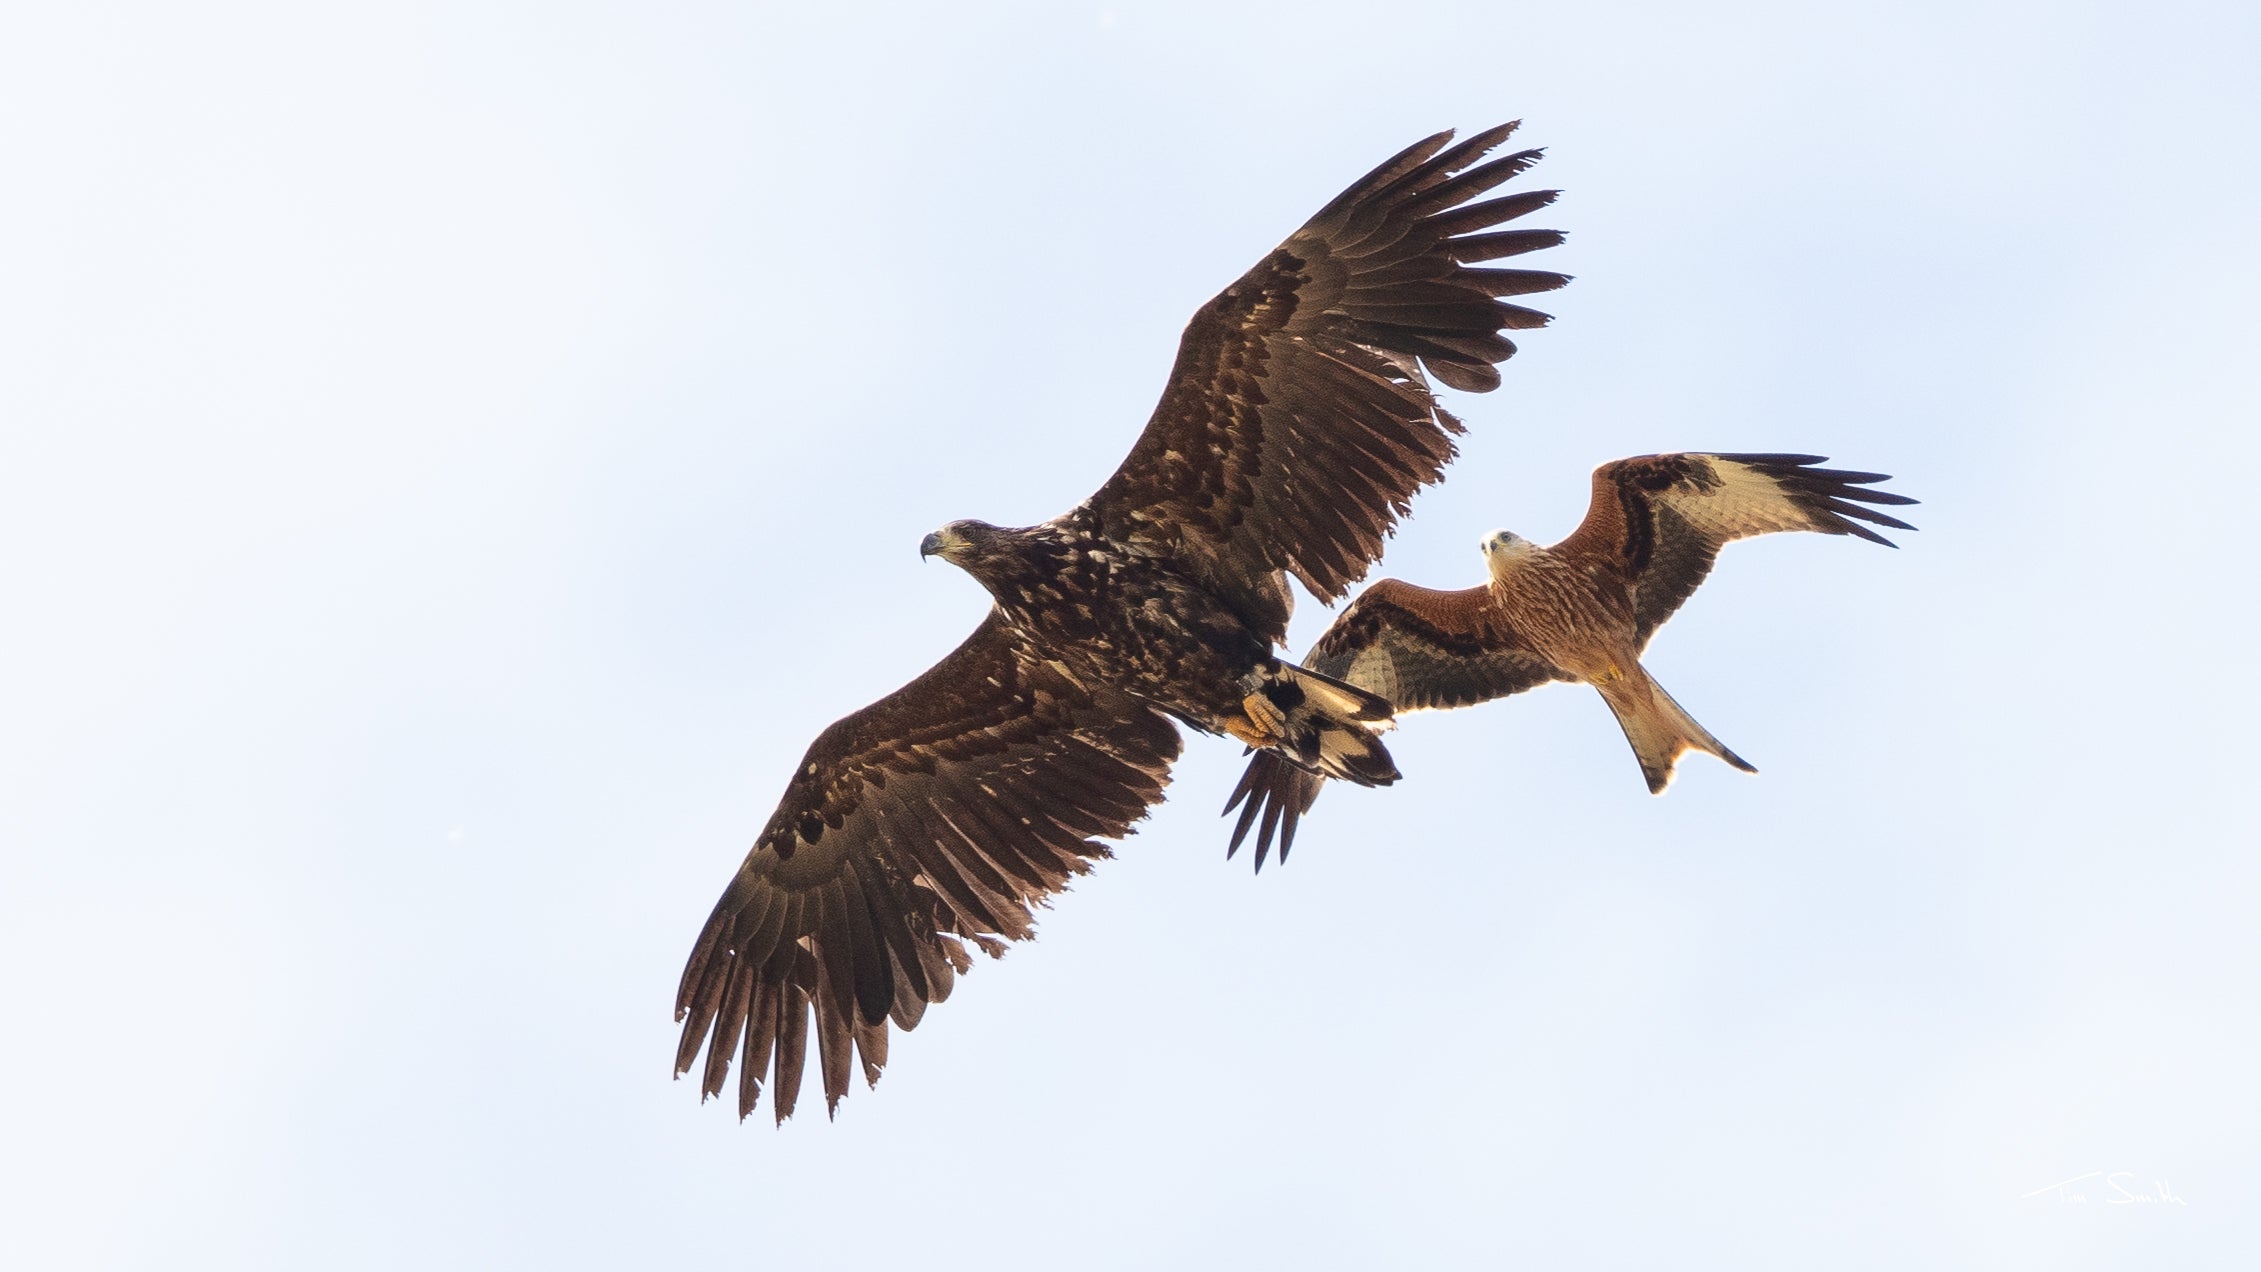 White-tailed eagles, seen here with a red kite, are the UK’s largest birds of prey